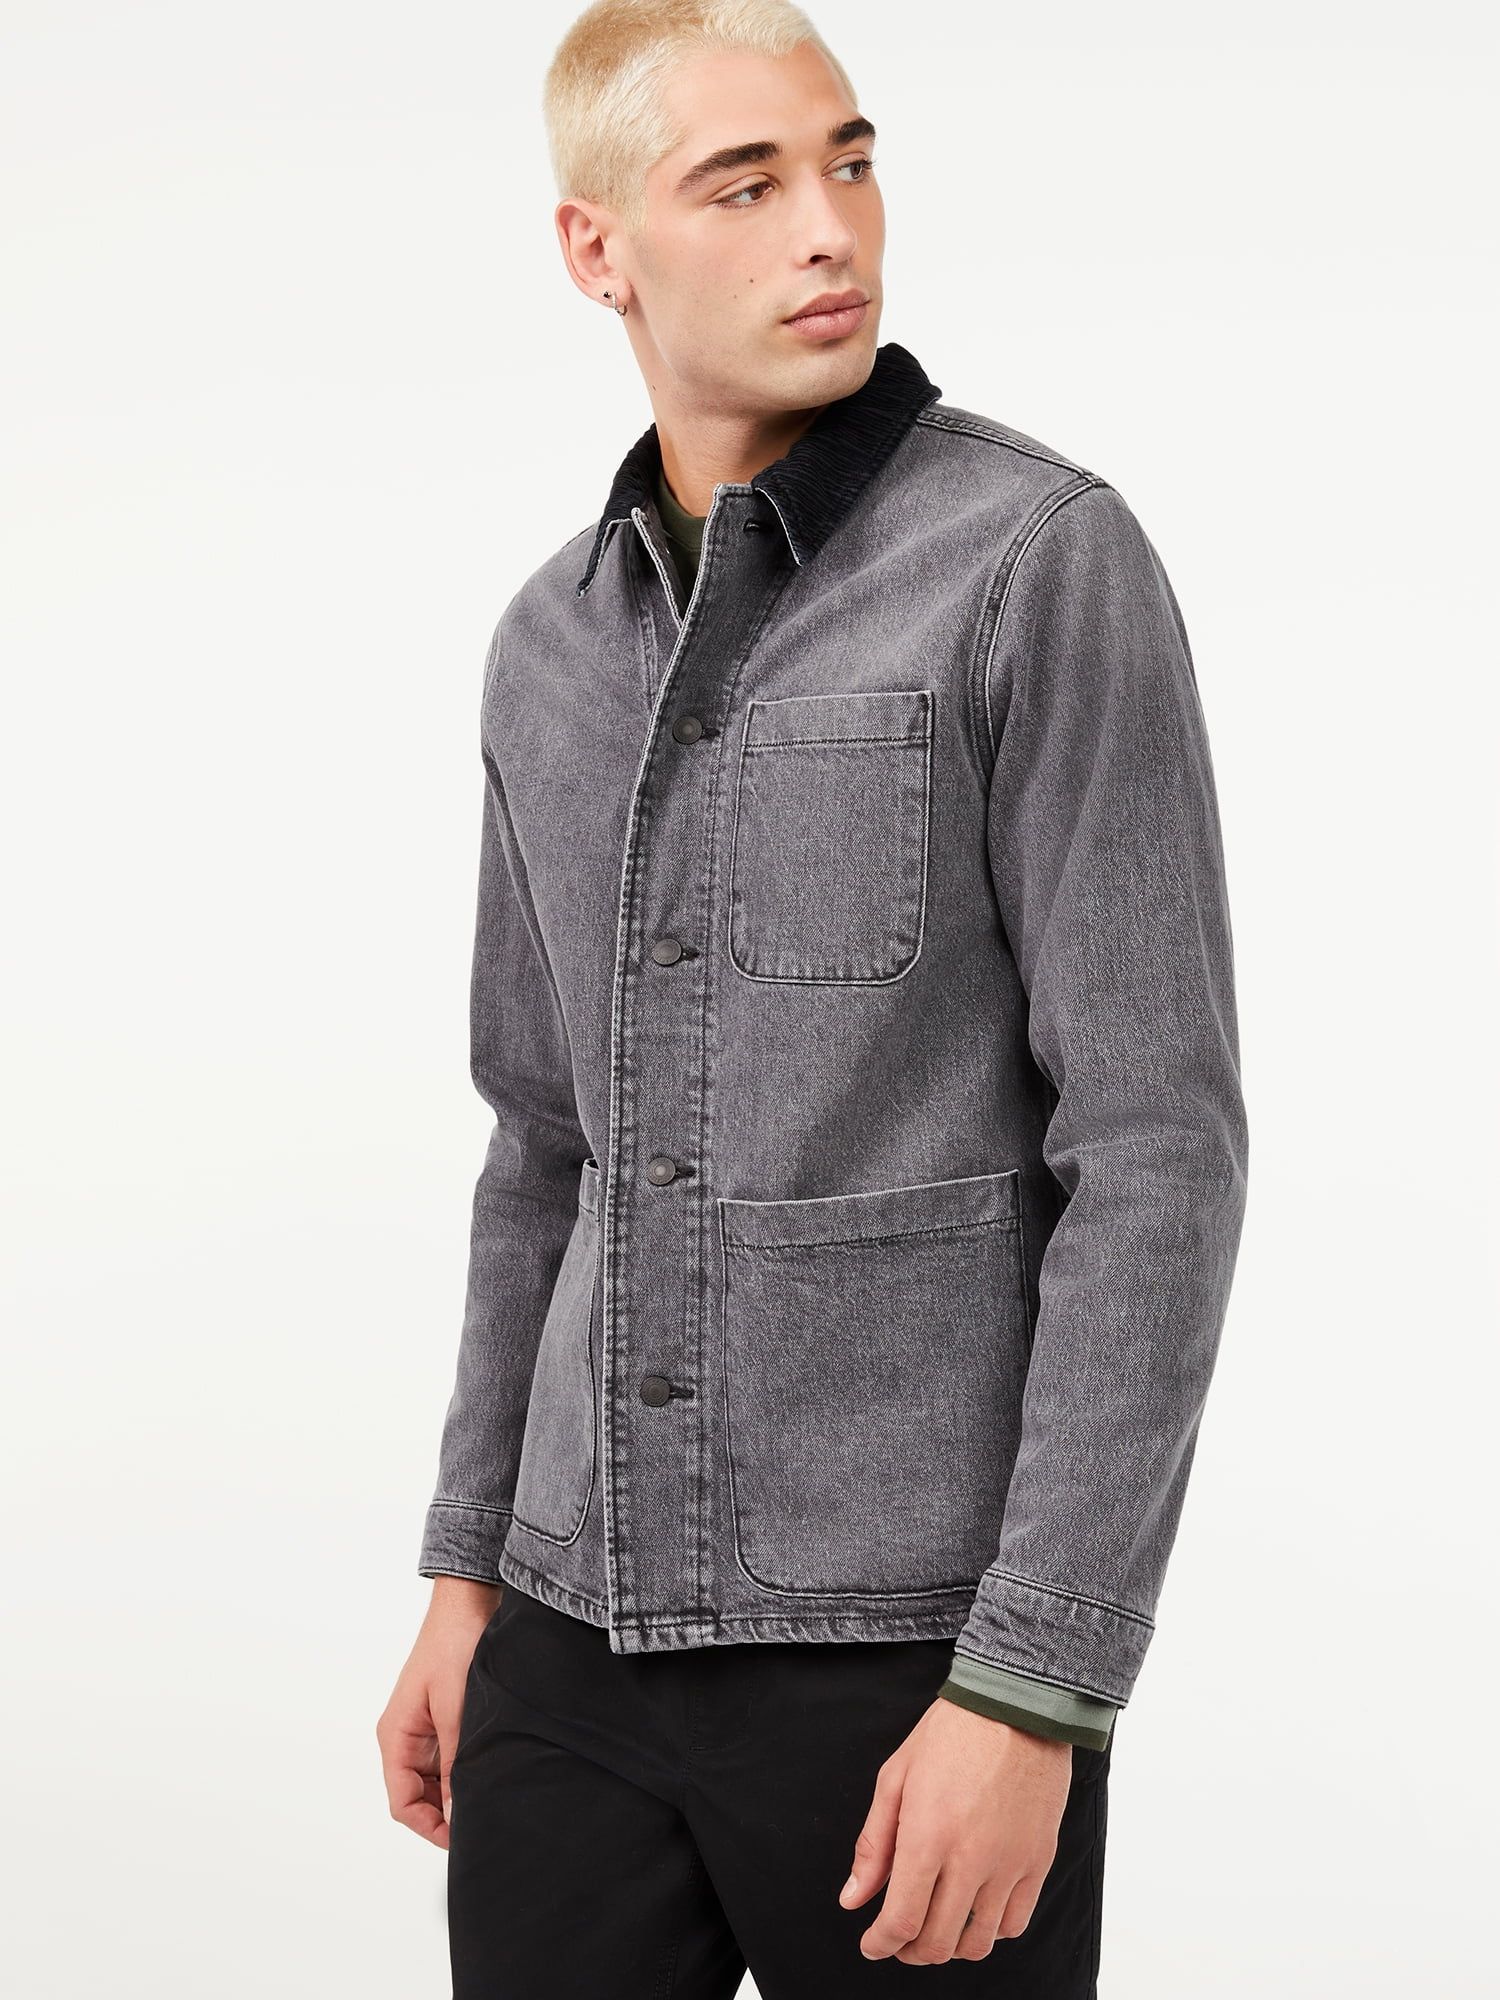 Free Assembly Men's Work Jacket with Corduroy Collar | Walmart (US)